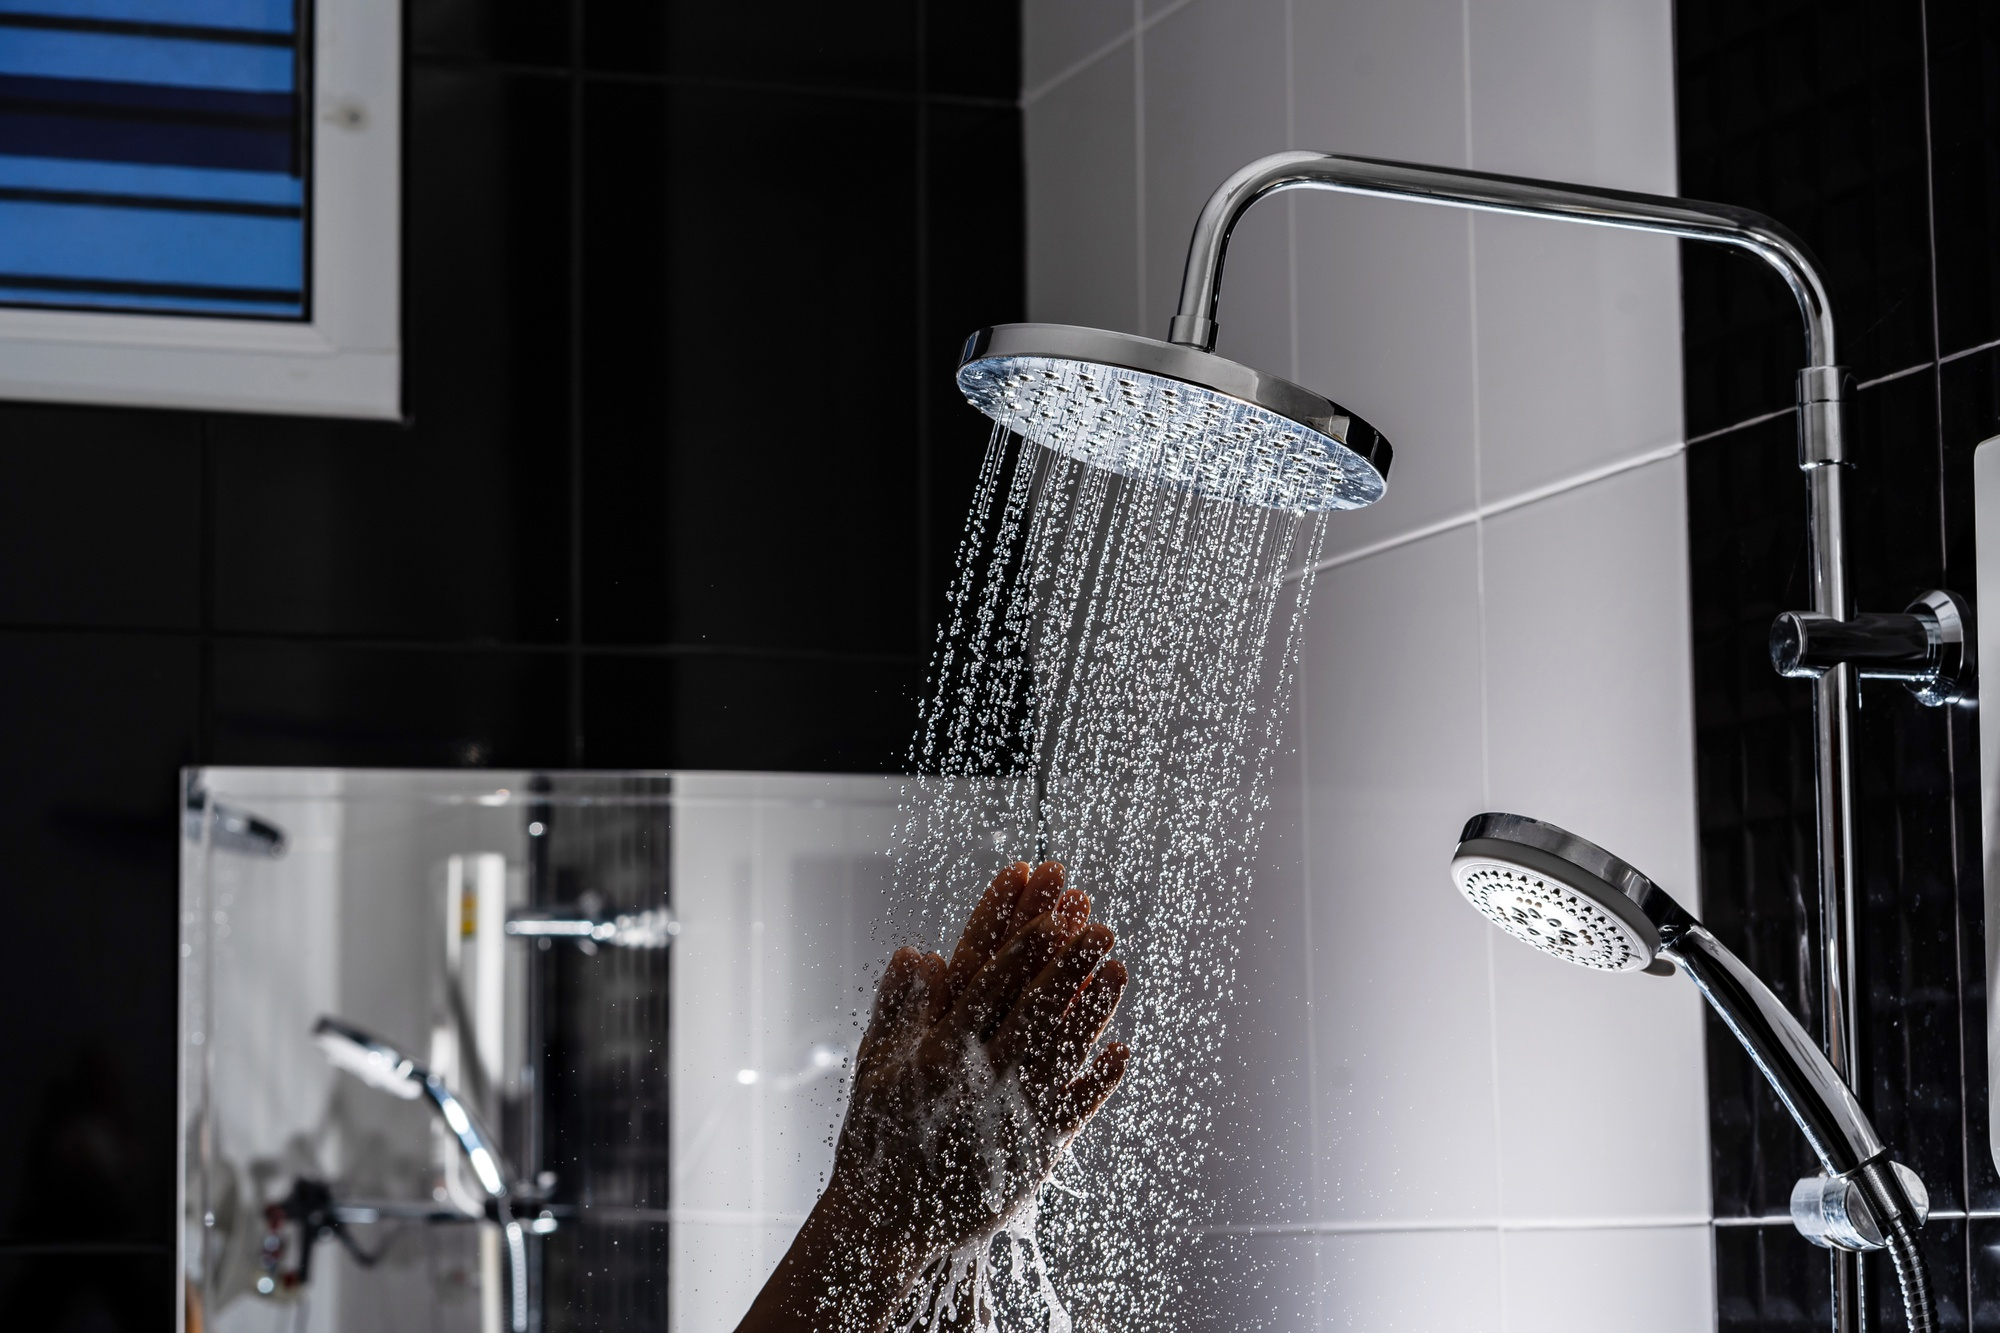 How Do I Pick the Best Shower Head for My Bathroom?